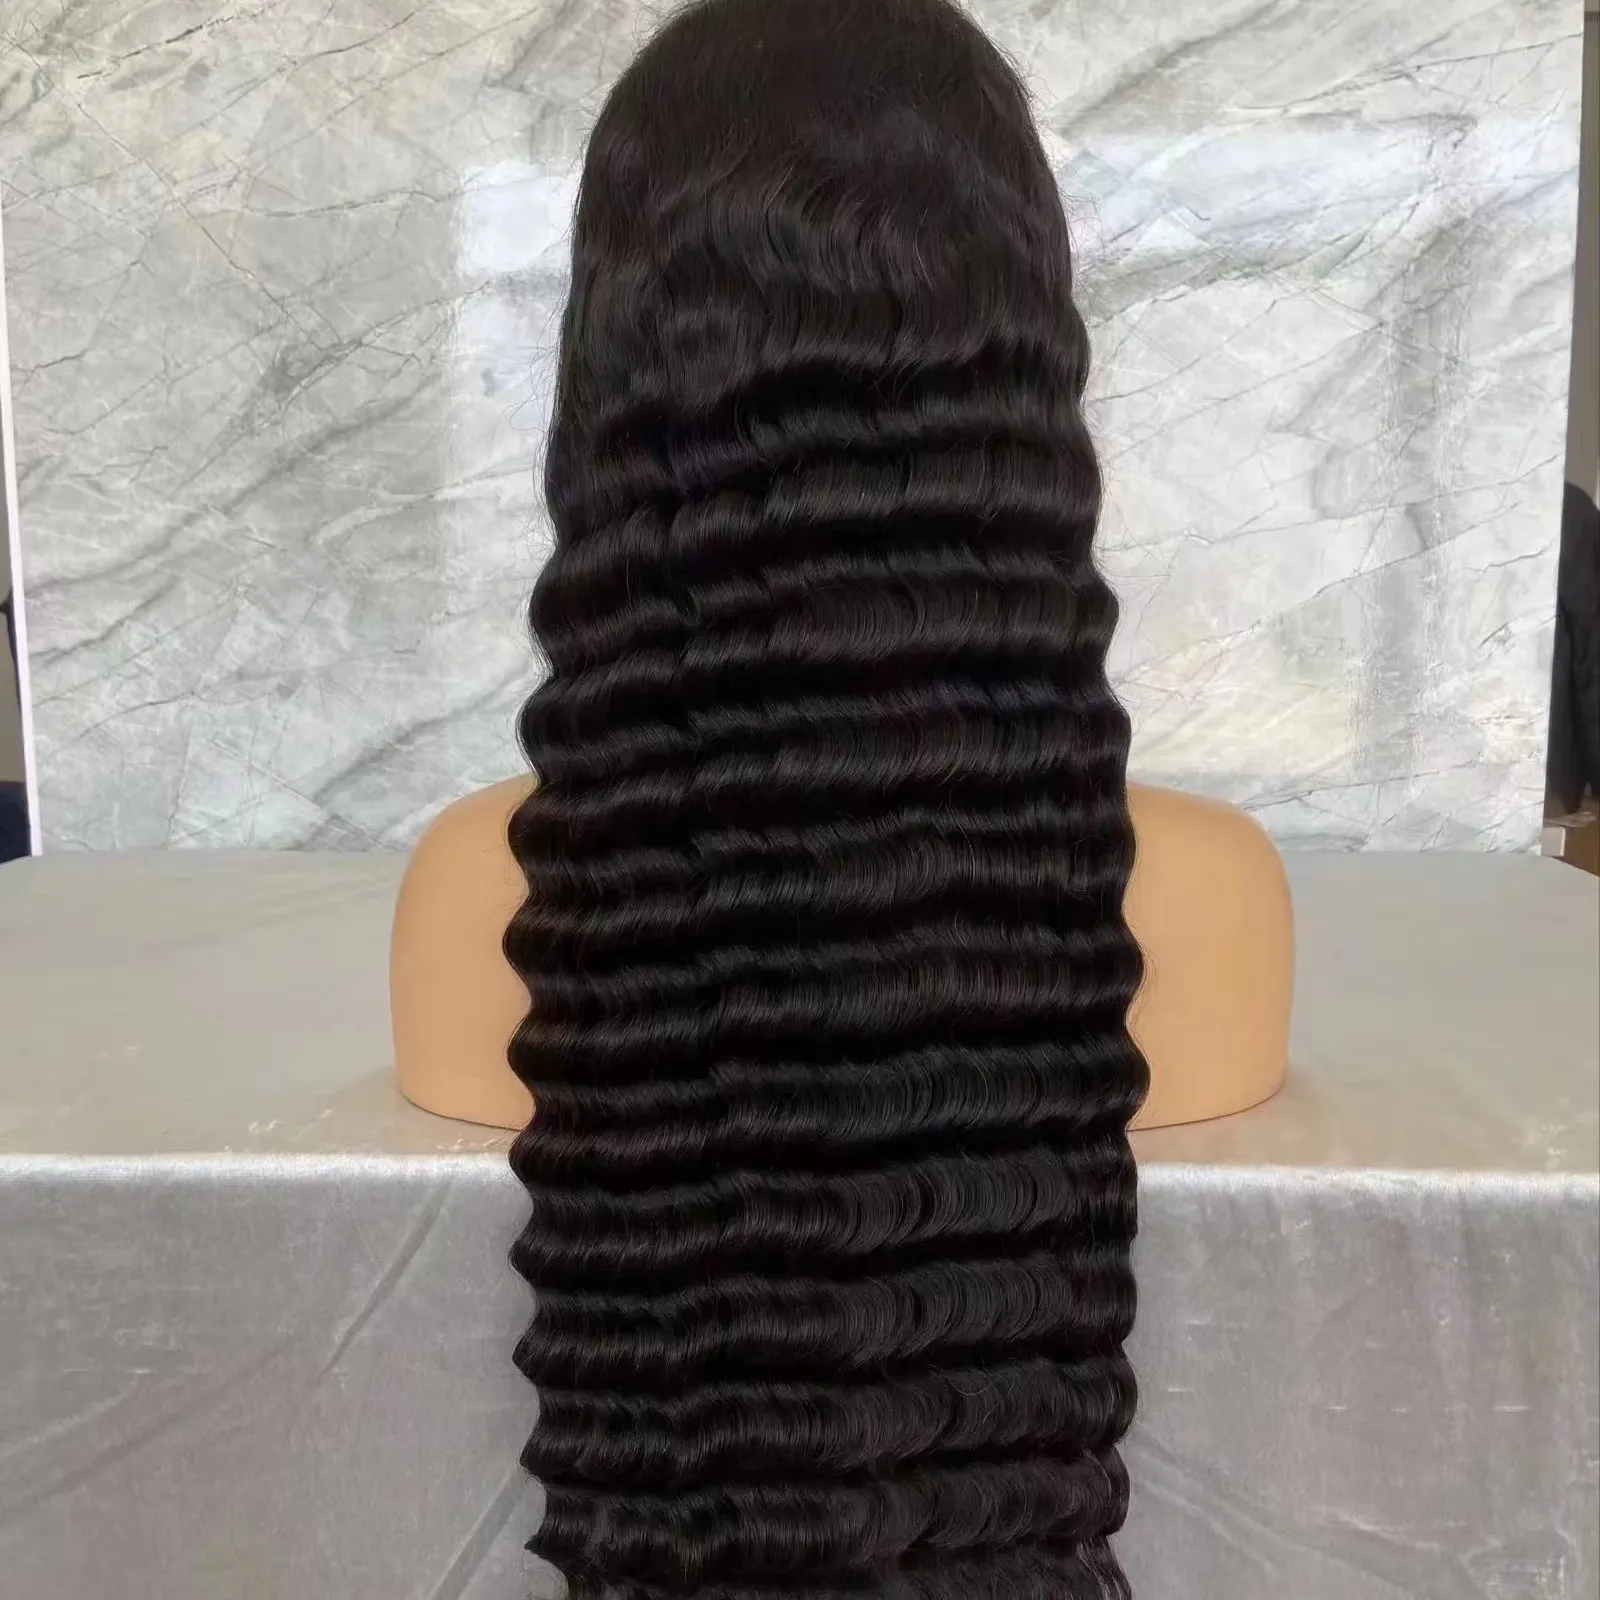 Amara fast shipping best sale 13x4 lace front wig top quality deep wave 100% Human Hair wig curly real Brazilians hair in stock